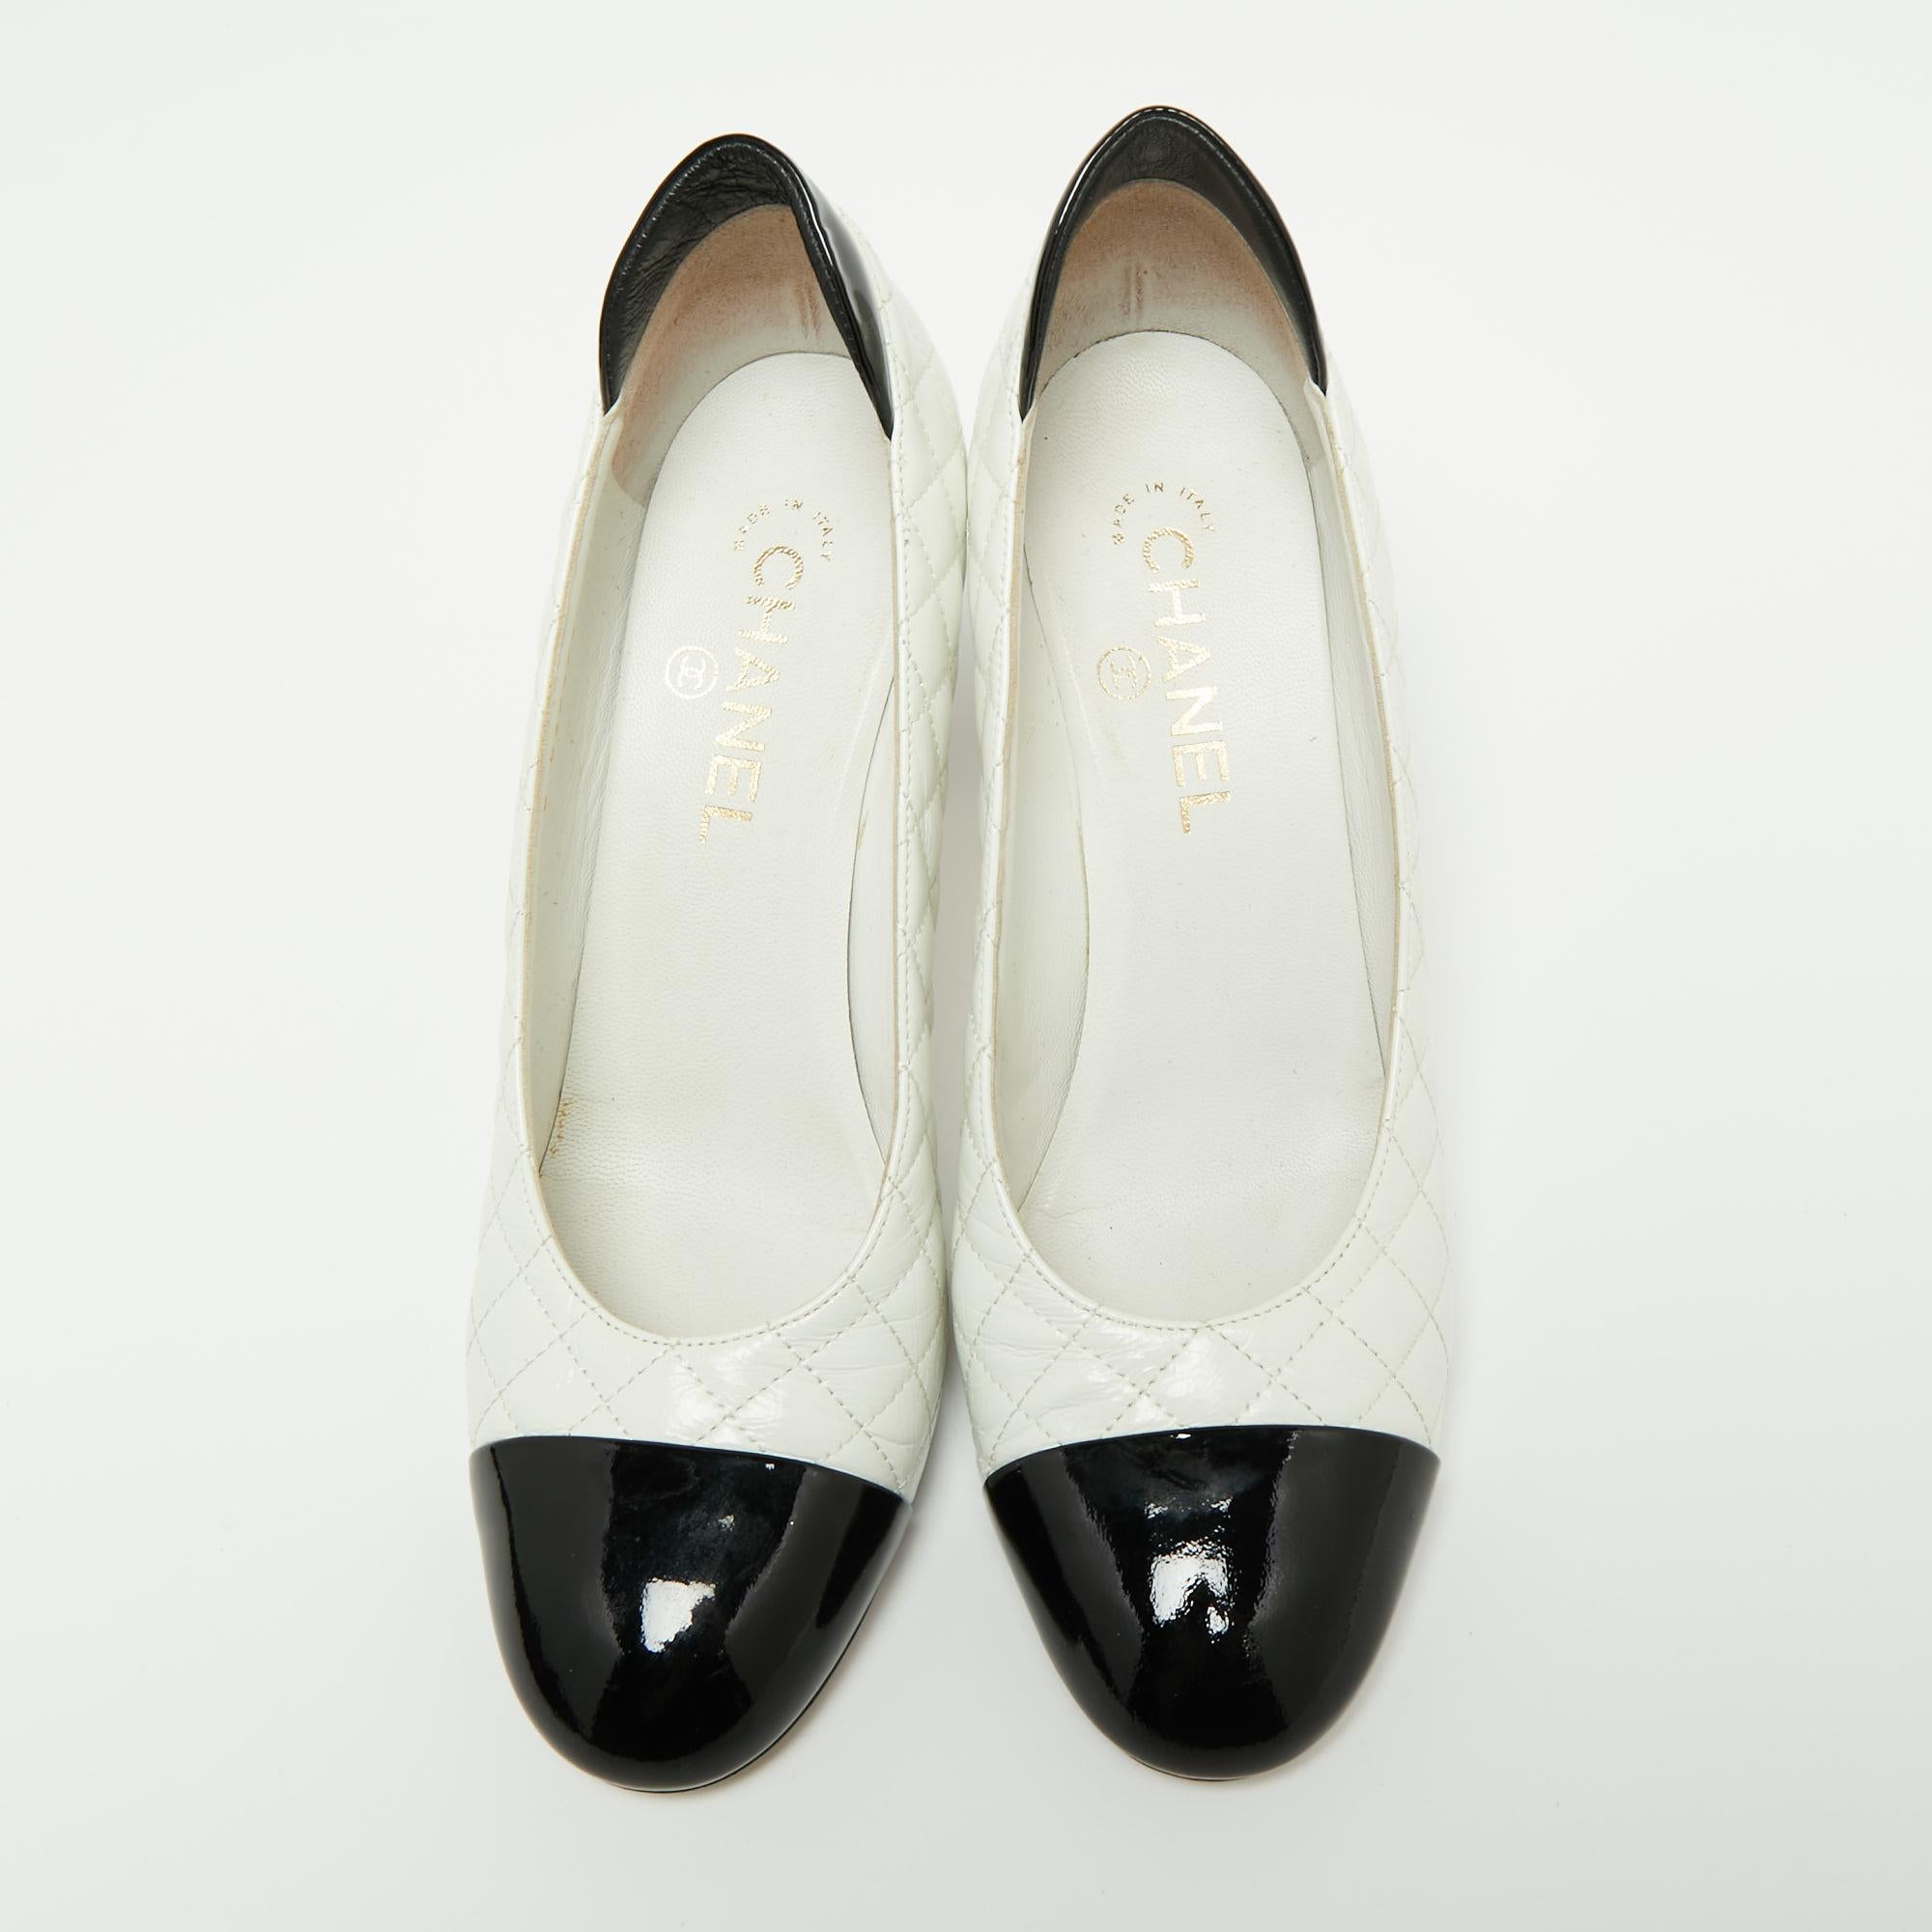 From the House of Chanel come these pumps to elevate the look of your attire. They are crafted using white-black quilted leather and patent leather. They showcase cap toes, a slip-on style, and 8.5 cm heels. They are adorned with silver-tone